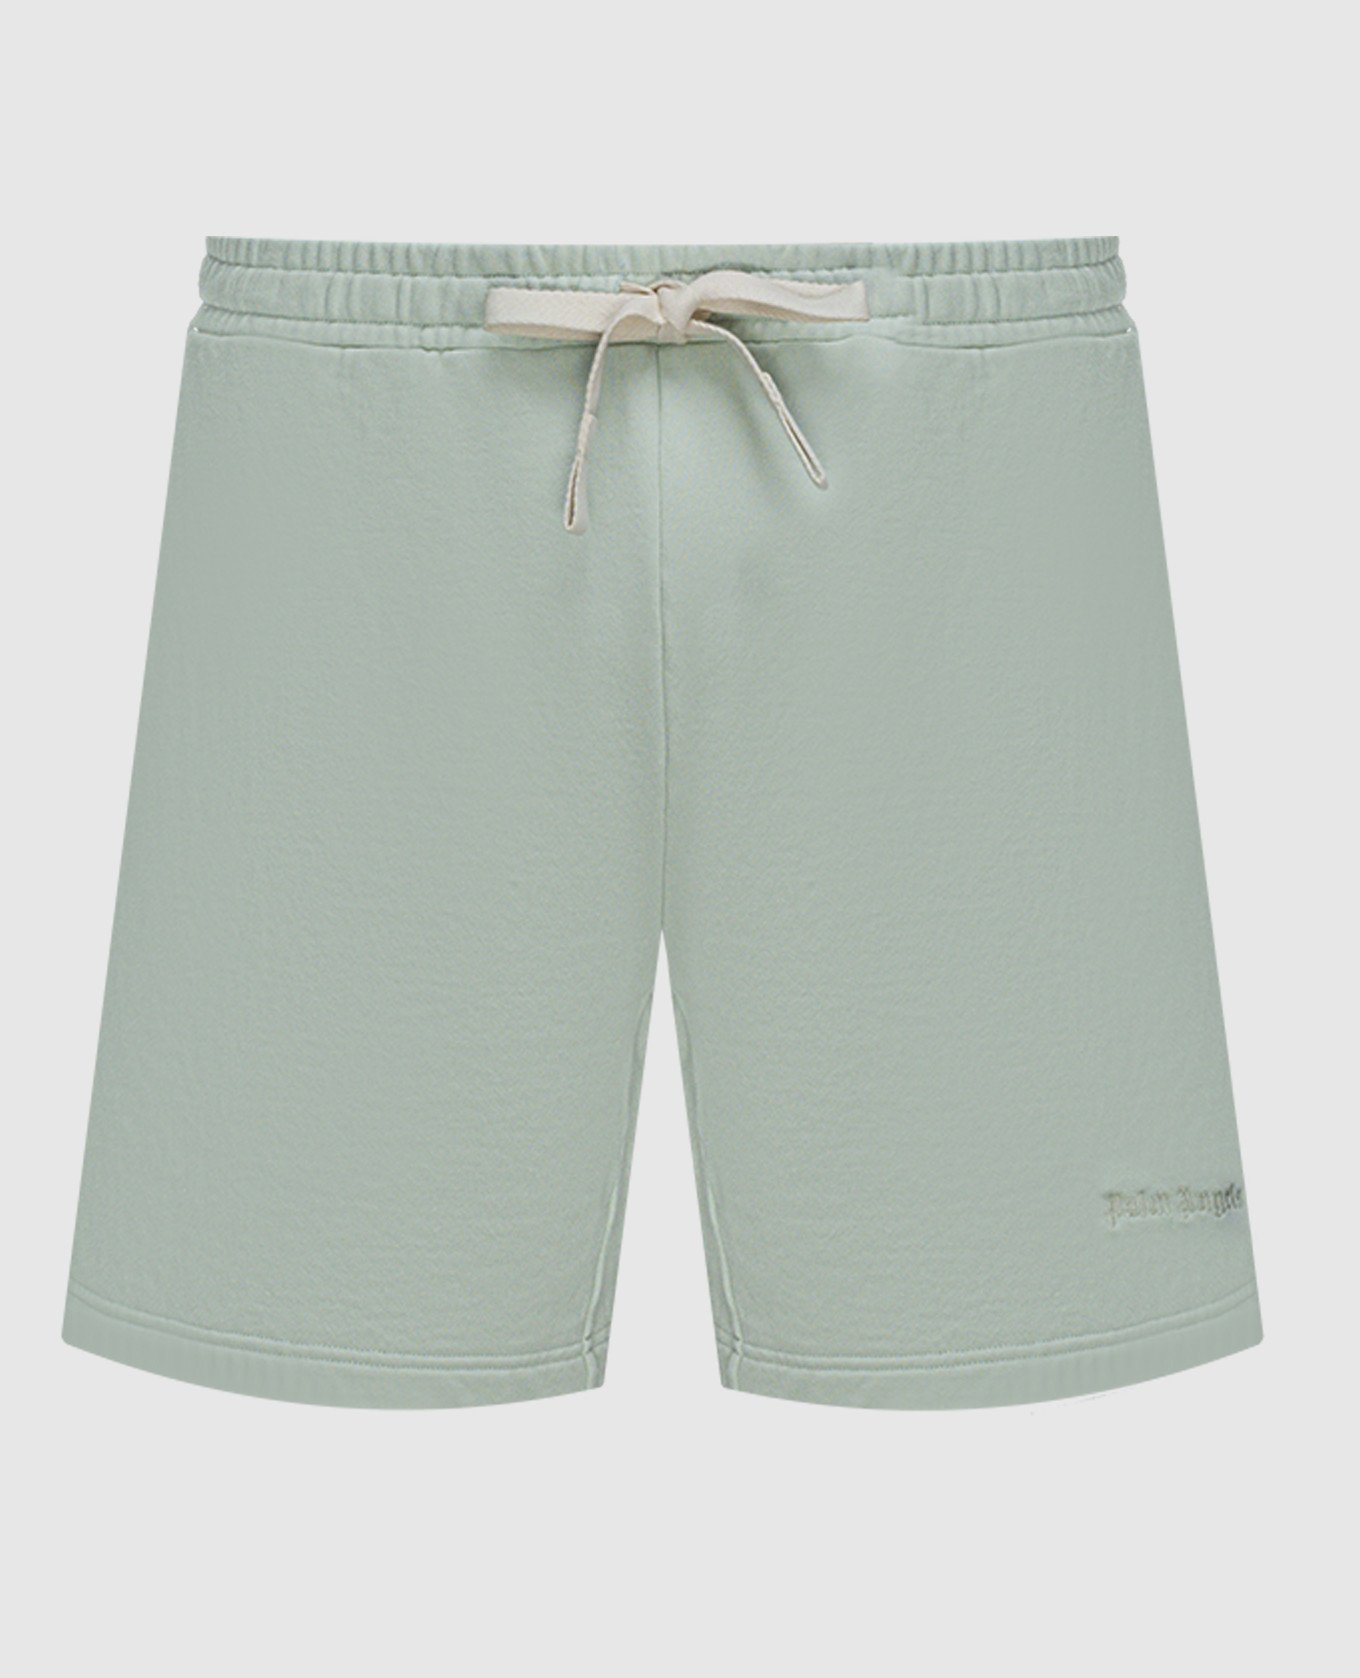 Green shorts with logo embroidery